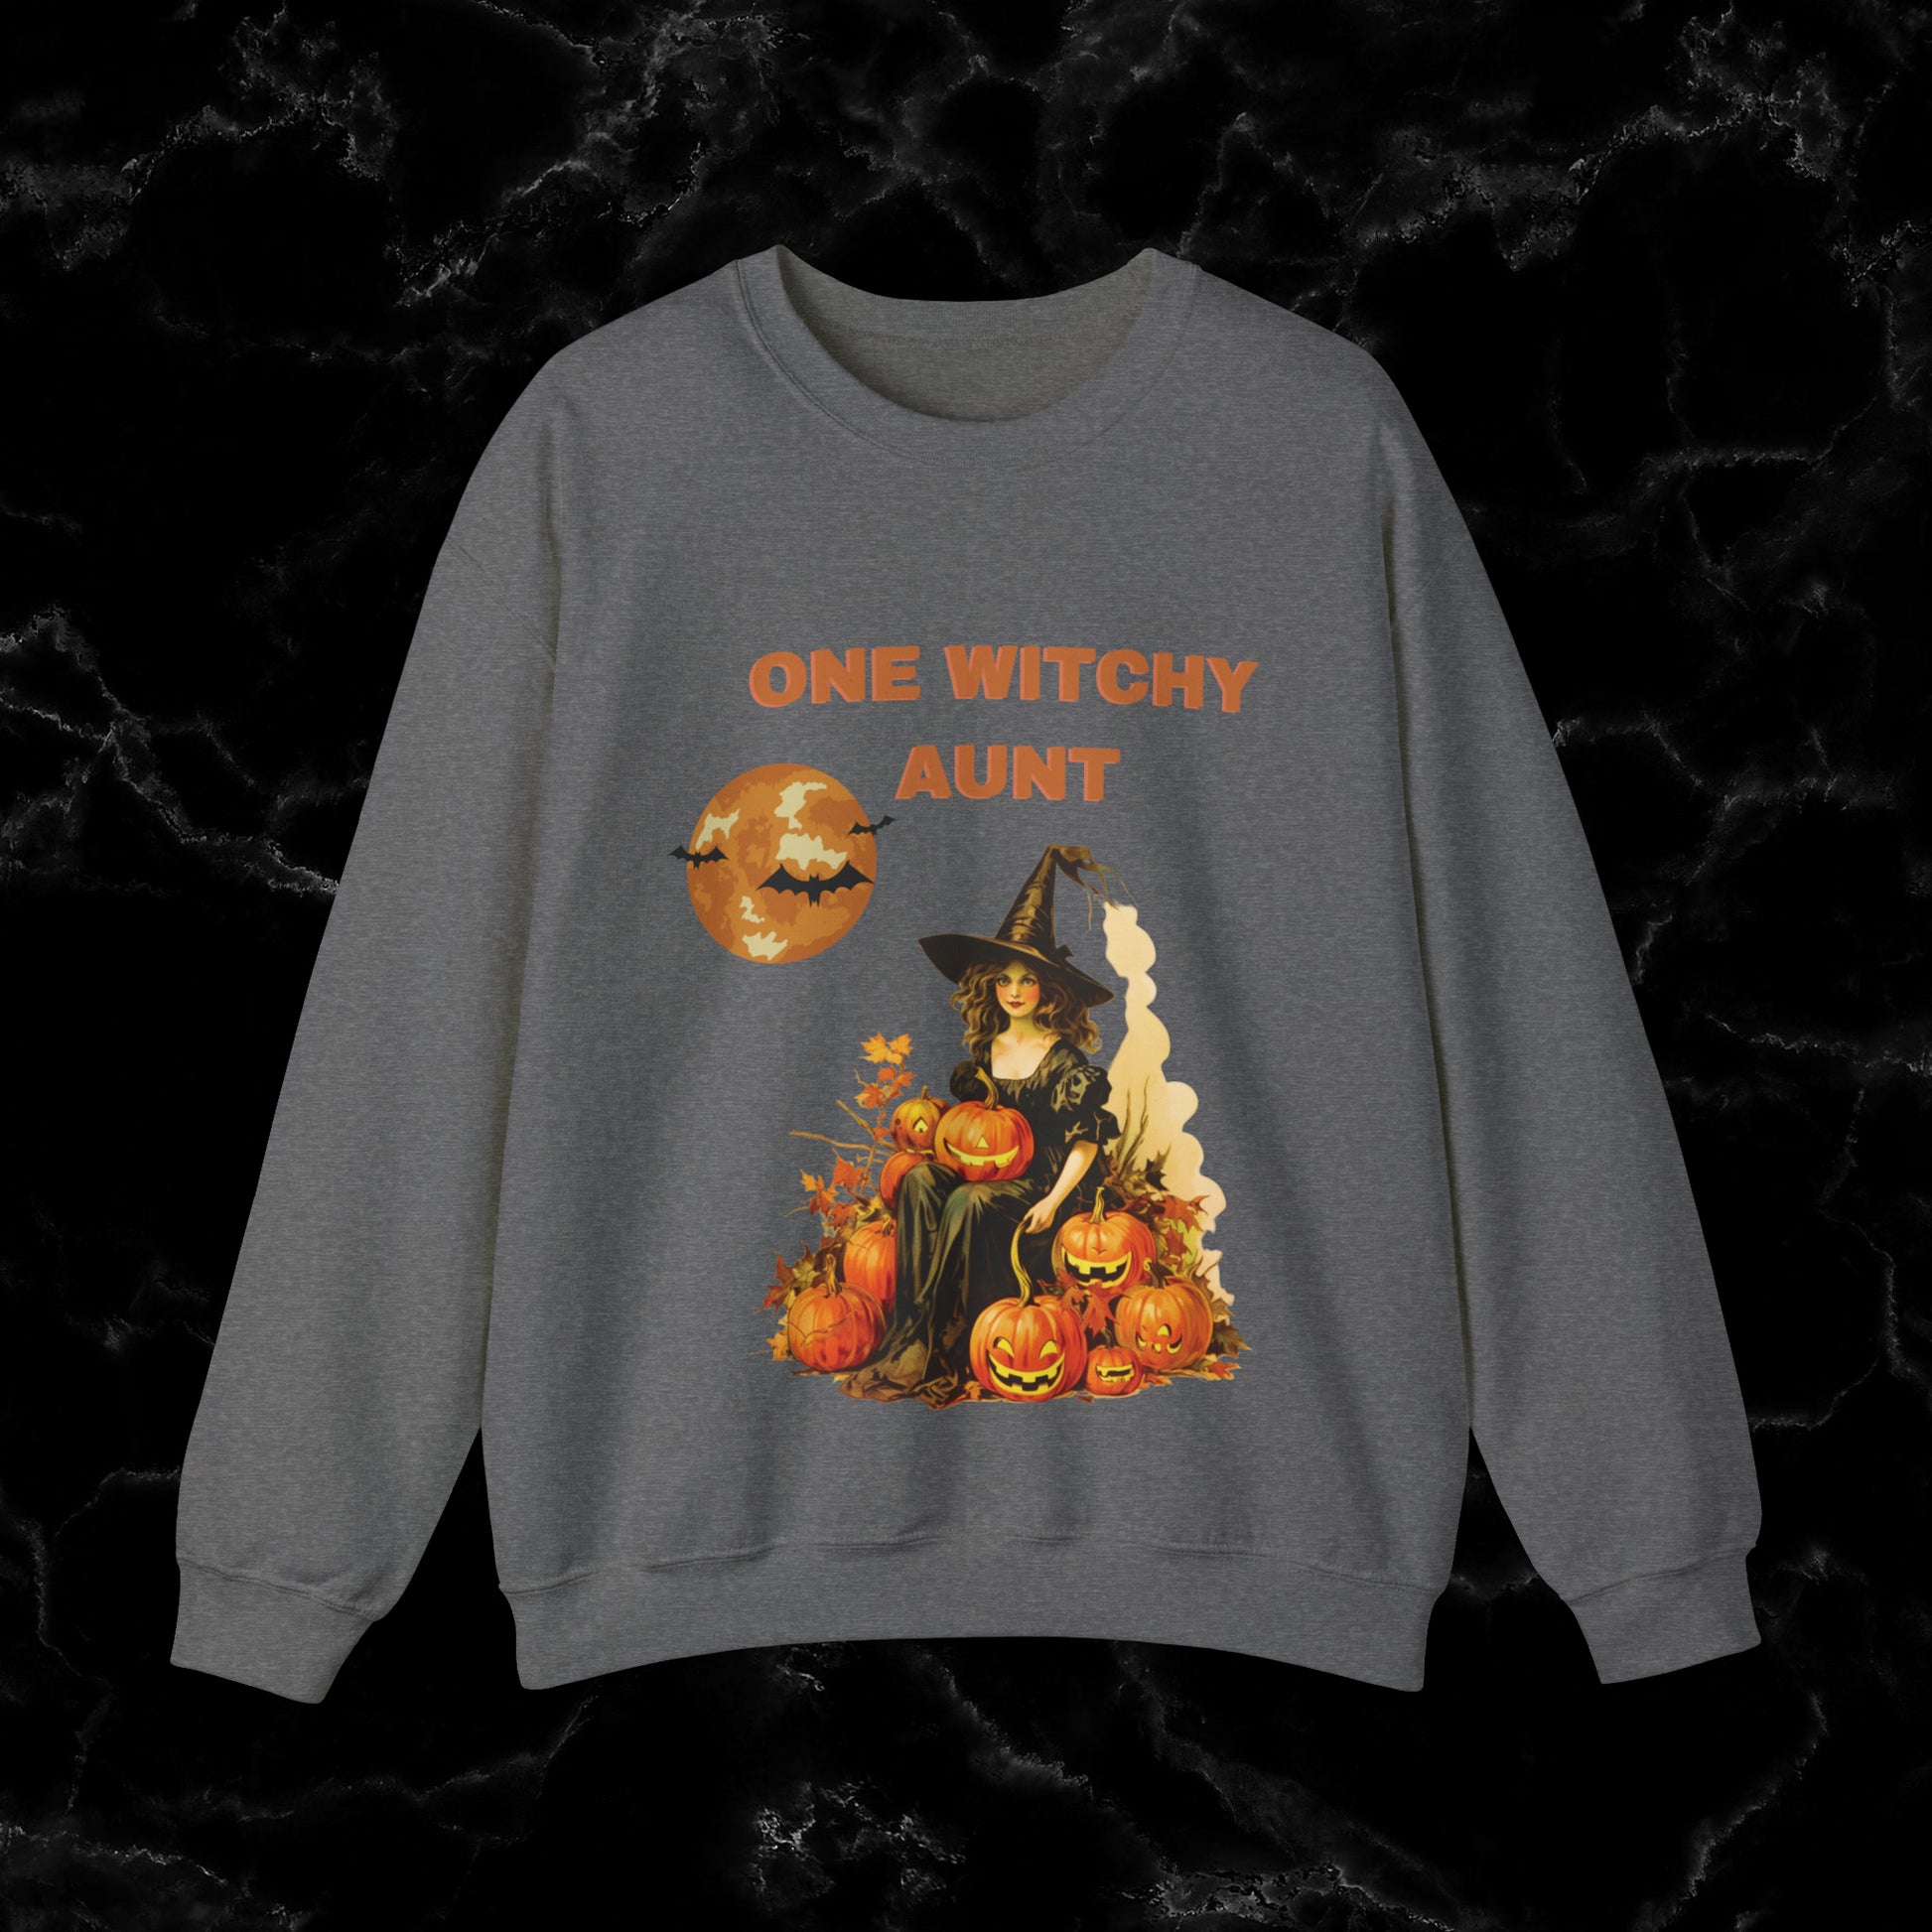 One Witchy Aunt Sweatshirt - Cool Aunt Shirt, Feral Aunt Sweatshirt, Perfect Gifts for Aunts Halloween Sweatshirt S Graphite Heather 